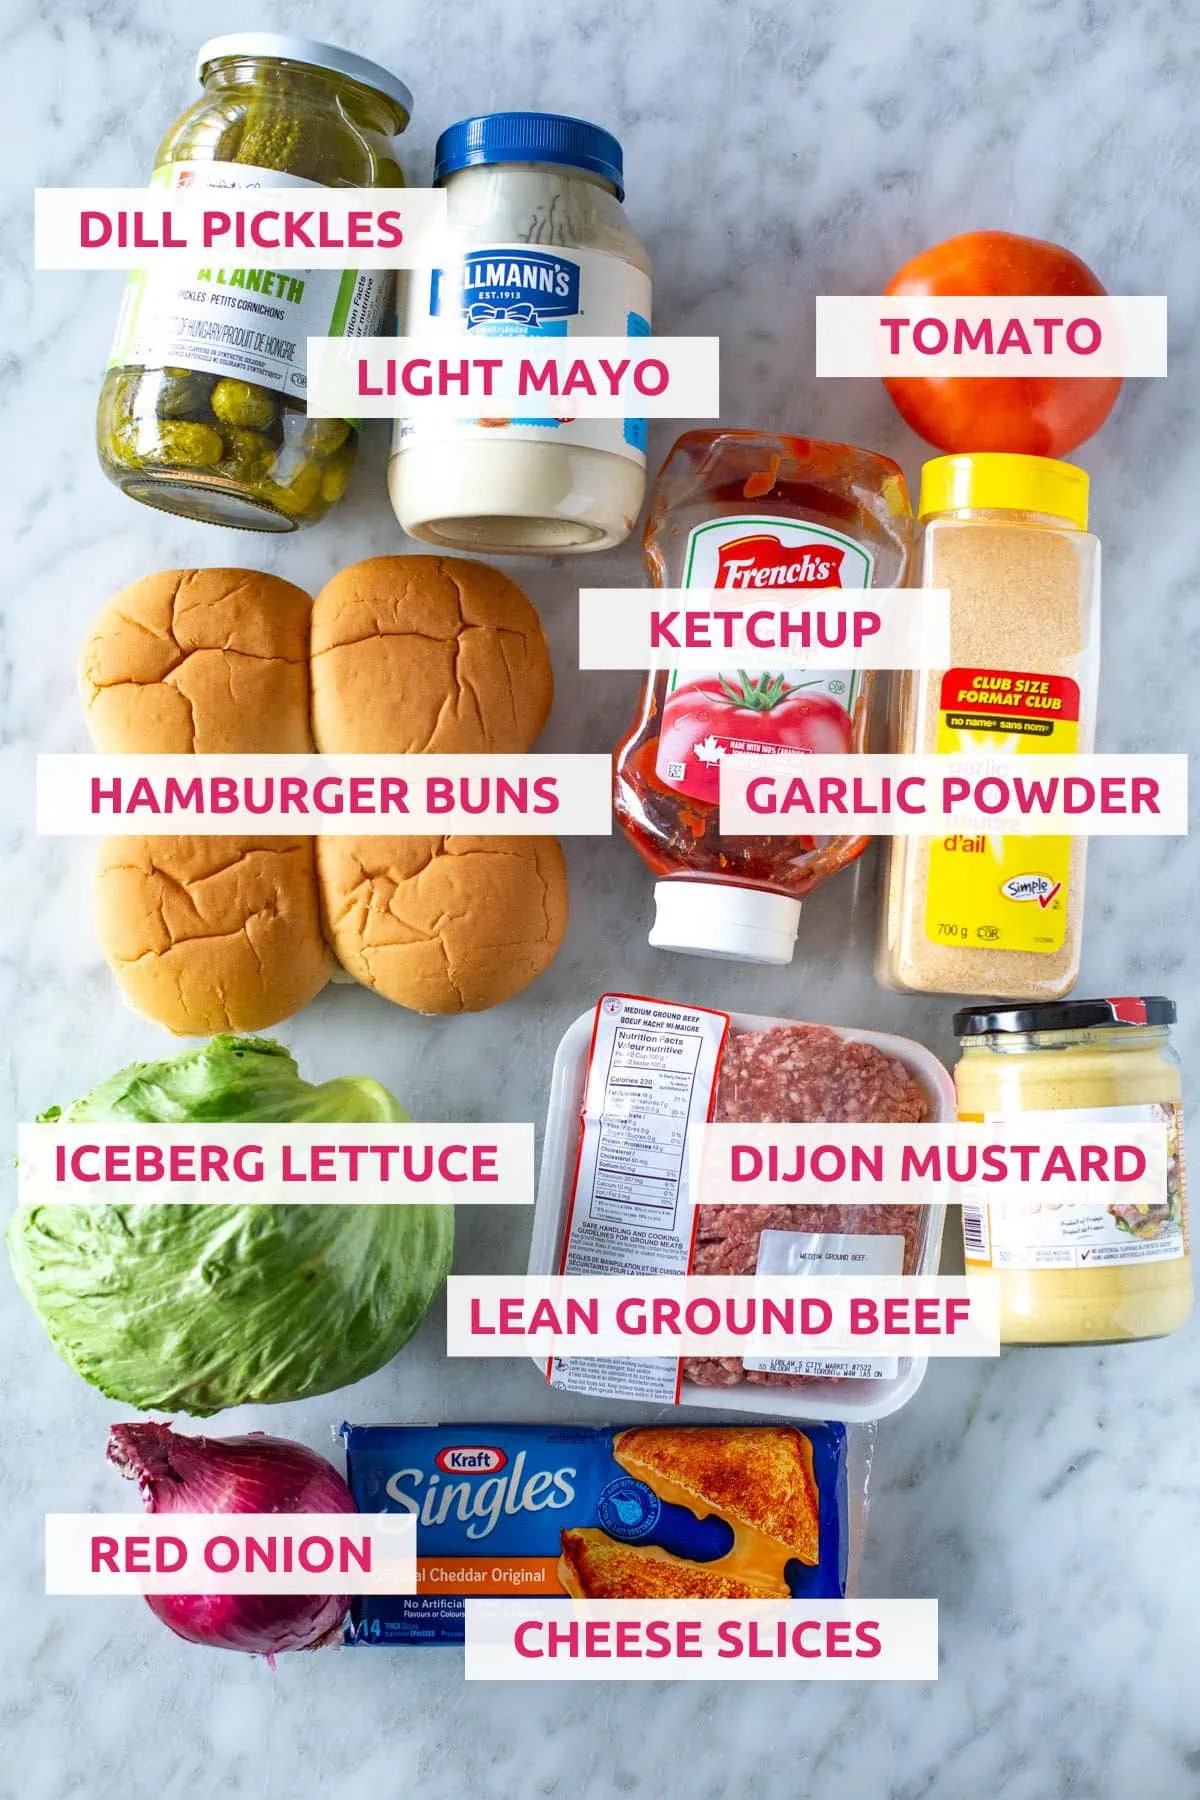 Ingredients for making smash burgers: dill pickles, light mayo, tomato, hamburger buns, ketchup, garlic powder, iceberg lettuce, ground beef, Dijon mustard, cheese slices and red onion.